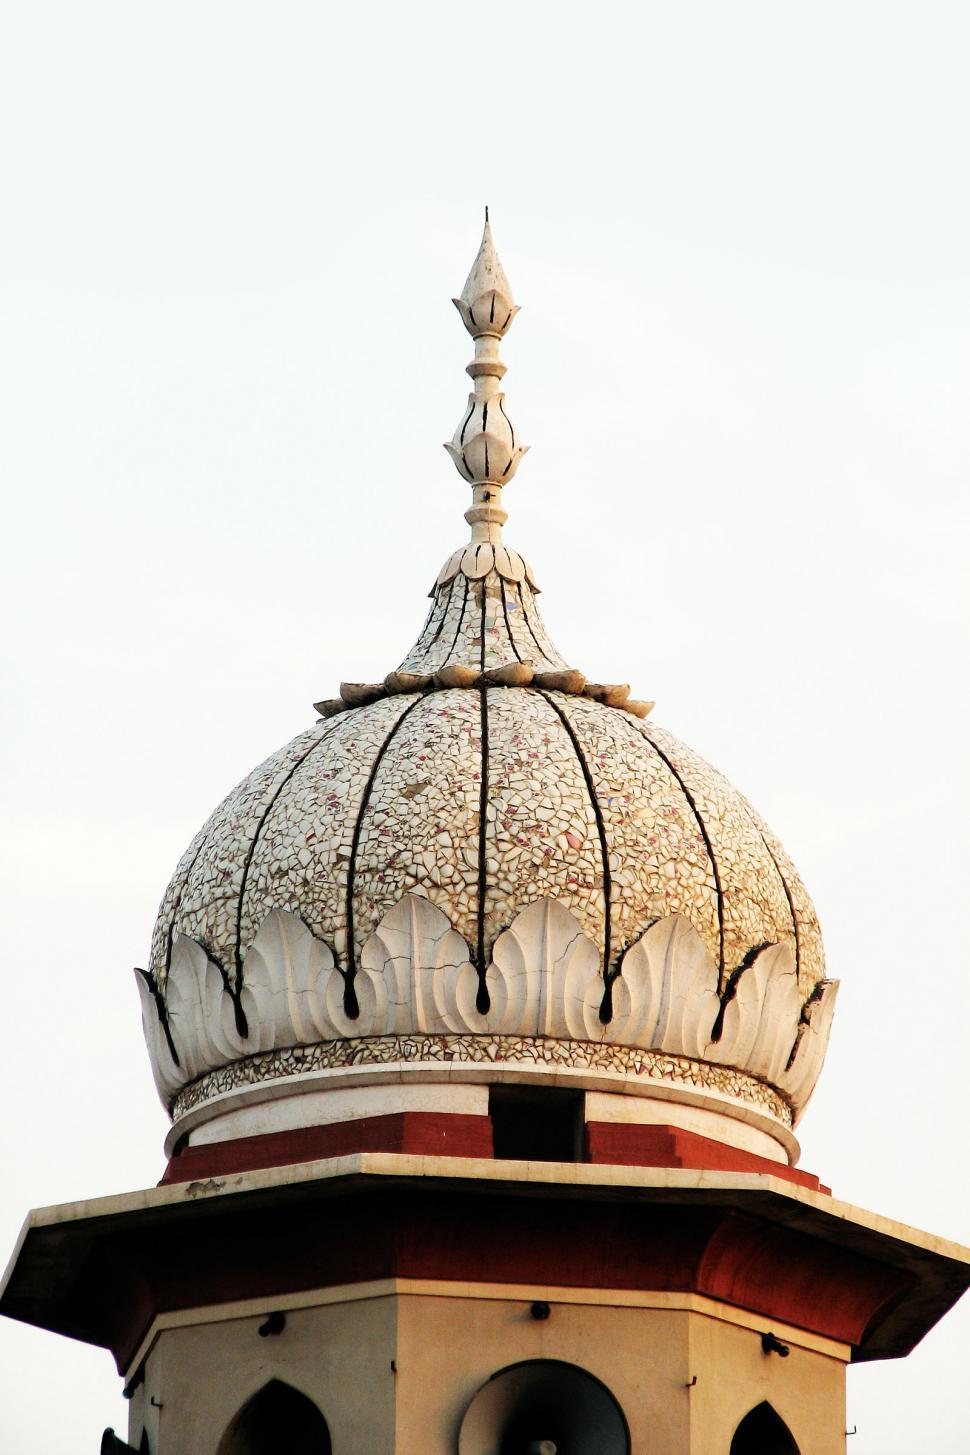 Free Image of Mosque Dome 